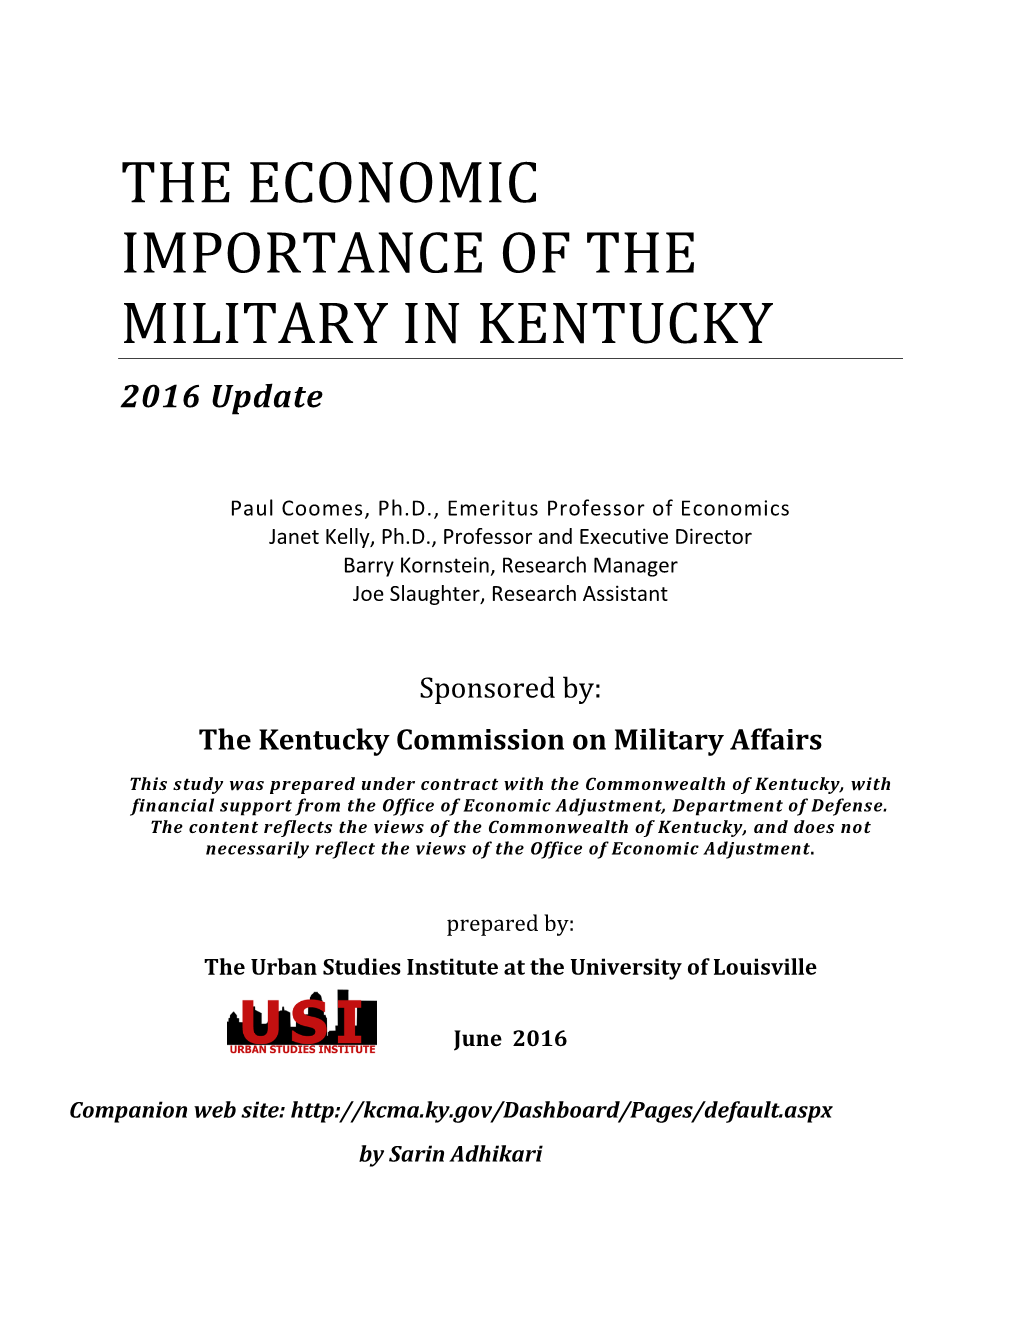 THE ECONOMIC IMPORTANCE of the MILITARY in KENTUCKY 2016 Update